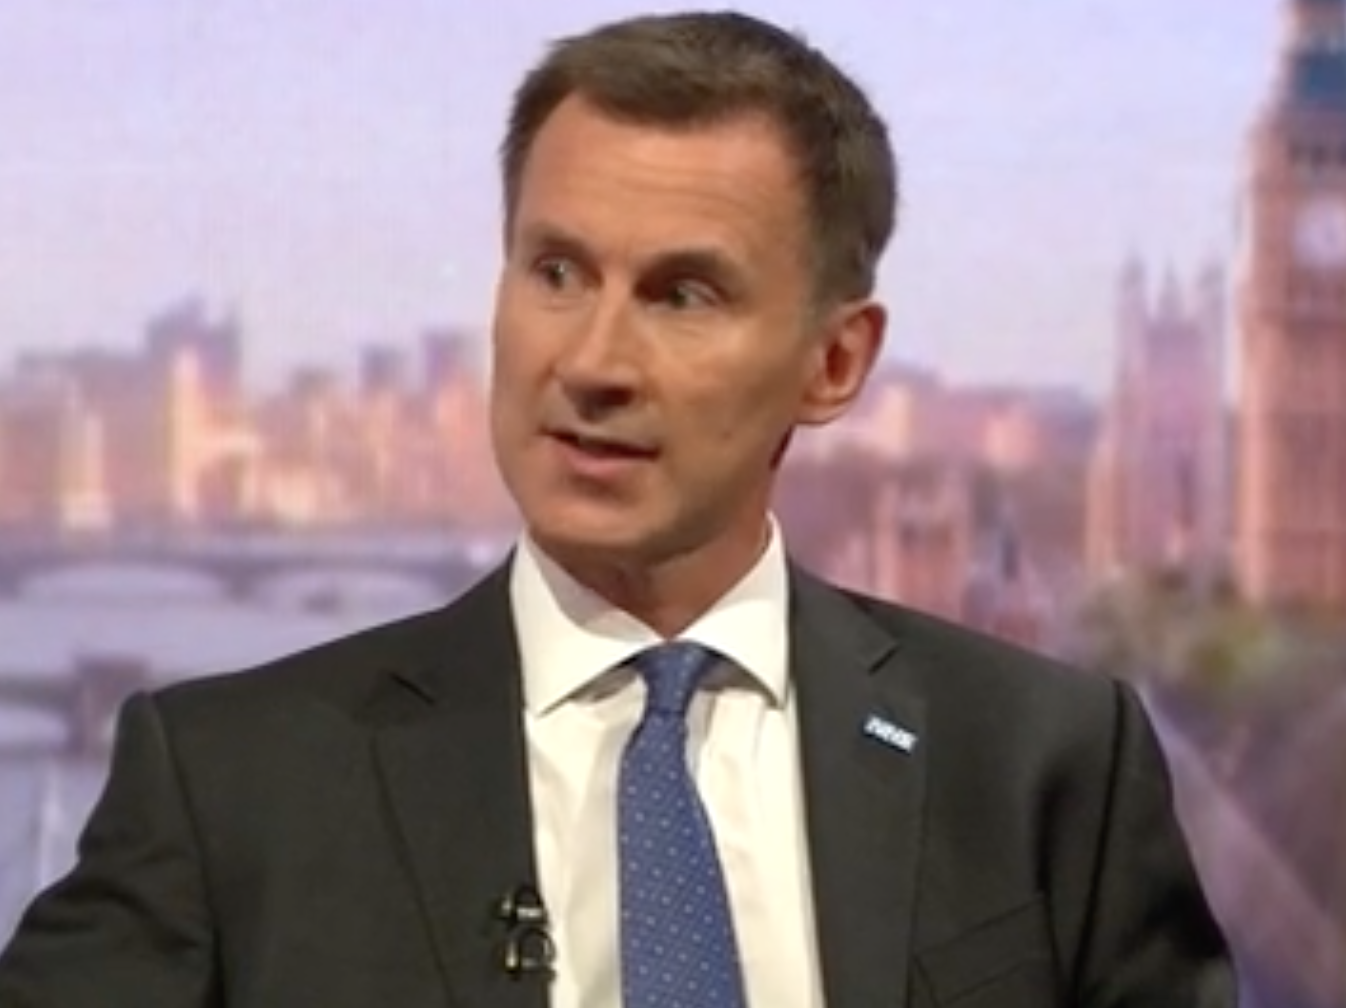 Businesses should stop warning about negative impact of Brexit, Jeremy Hunt says